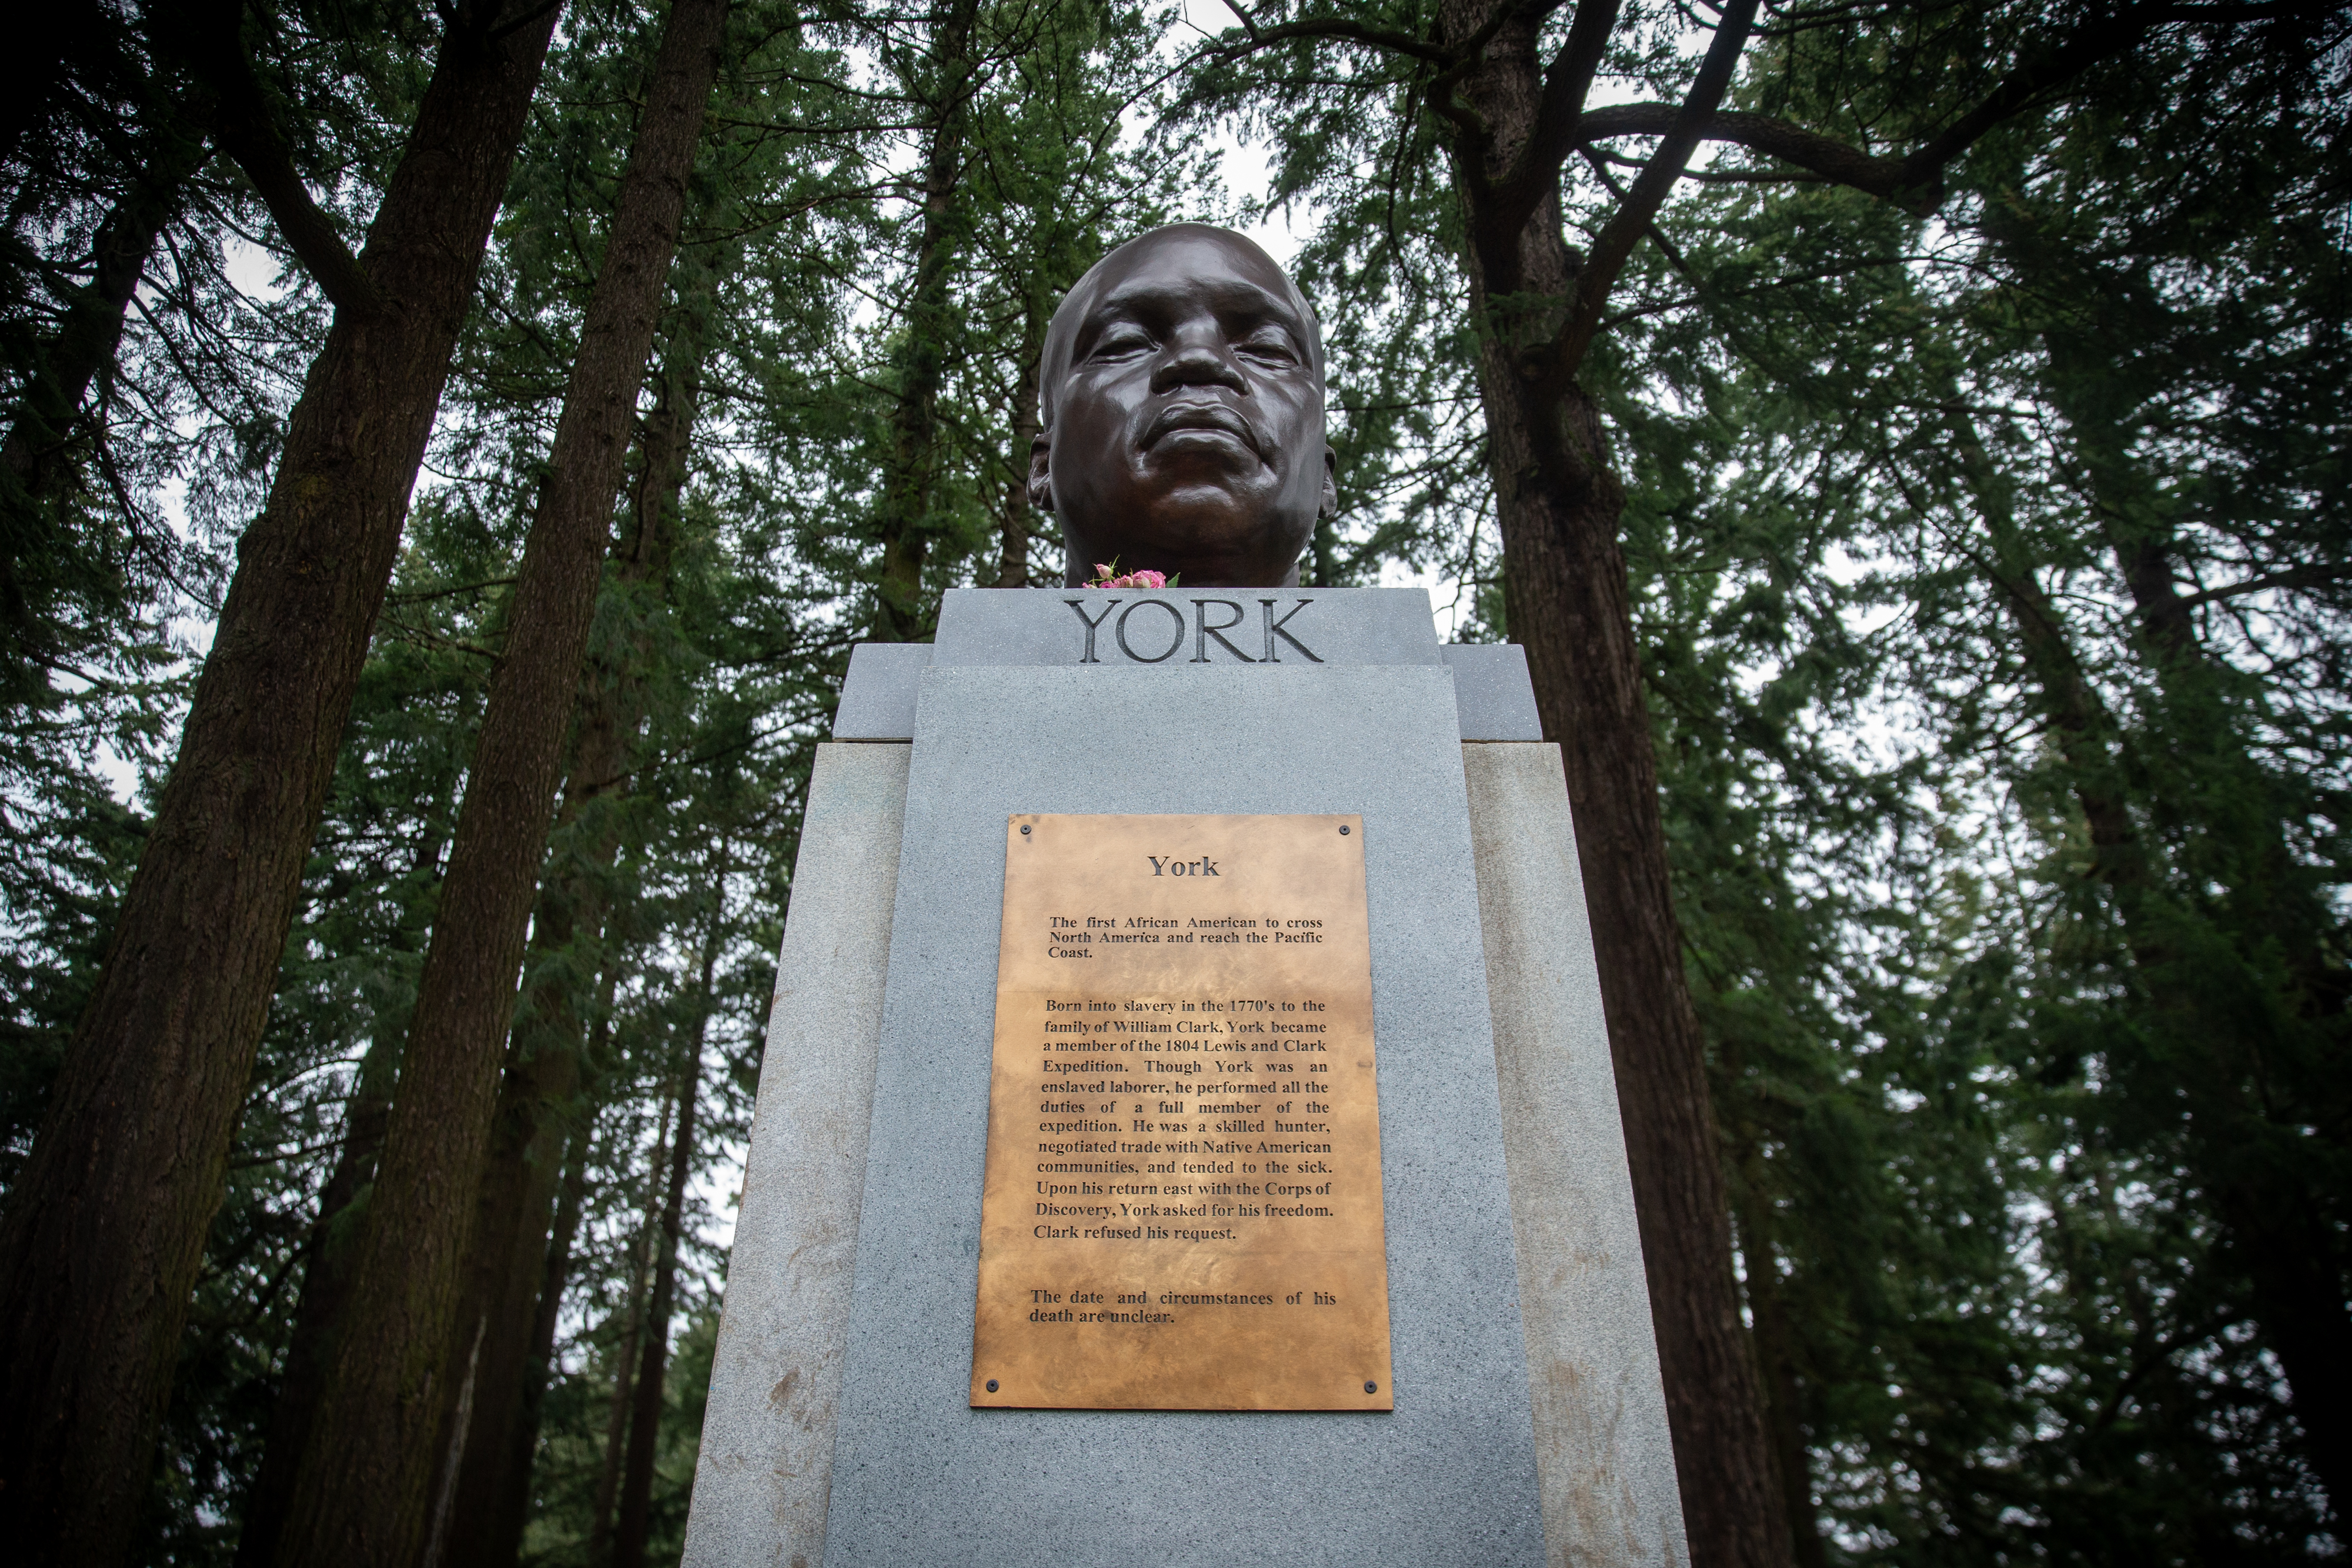 Anonymous Artist Installs Bust of York, Enslaved Explorer Who Accompanied  Lewis and Clark, in Portland Park, Smart News